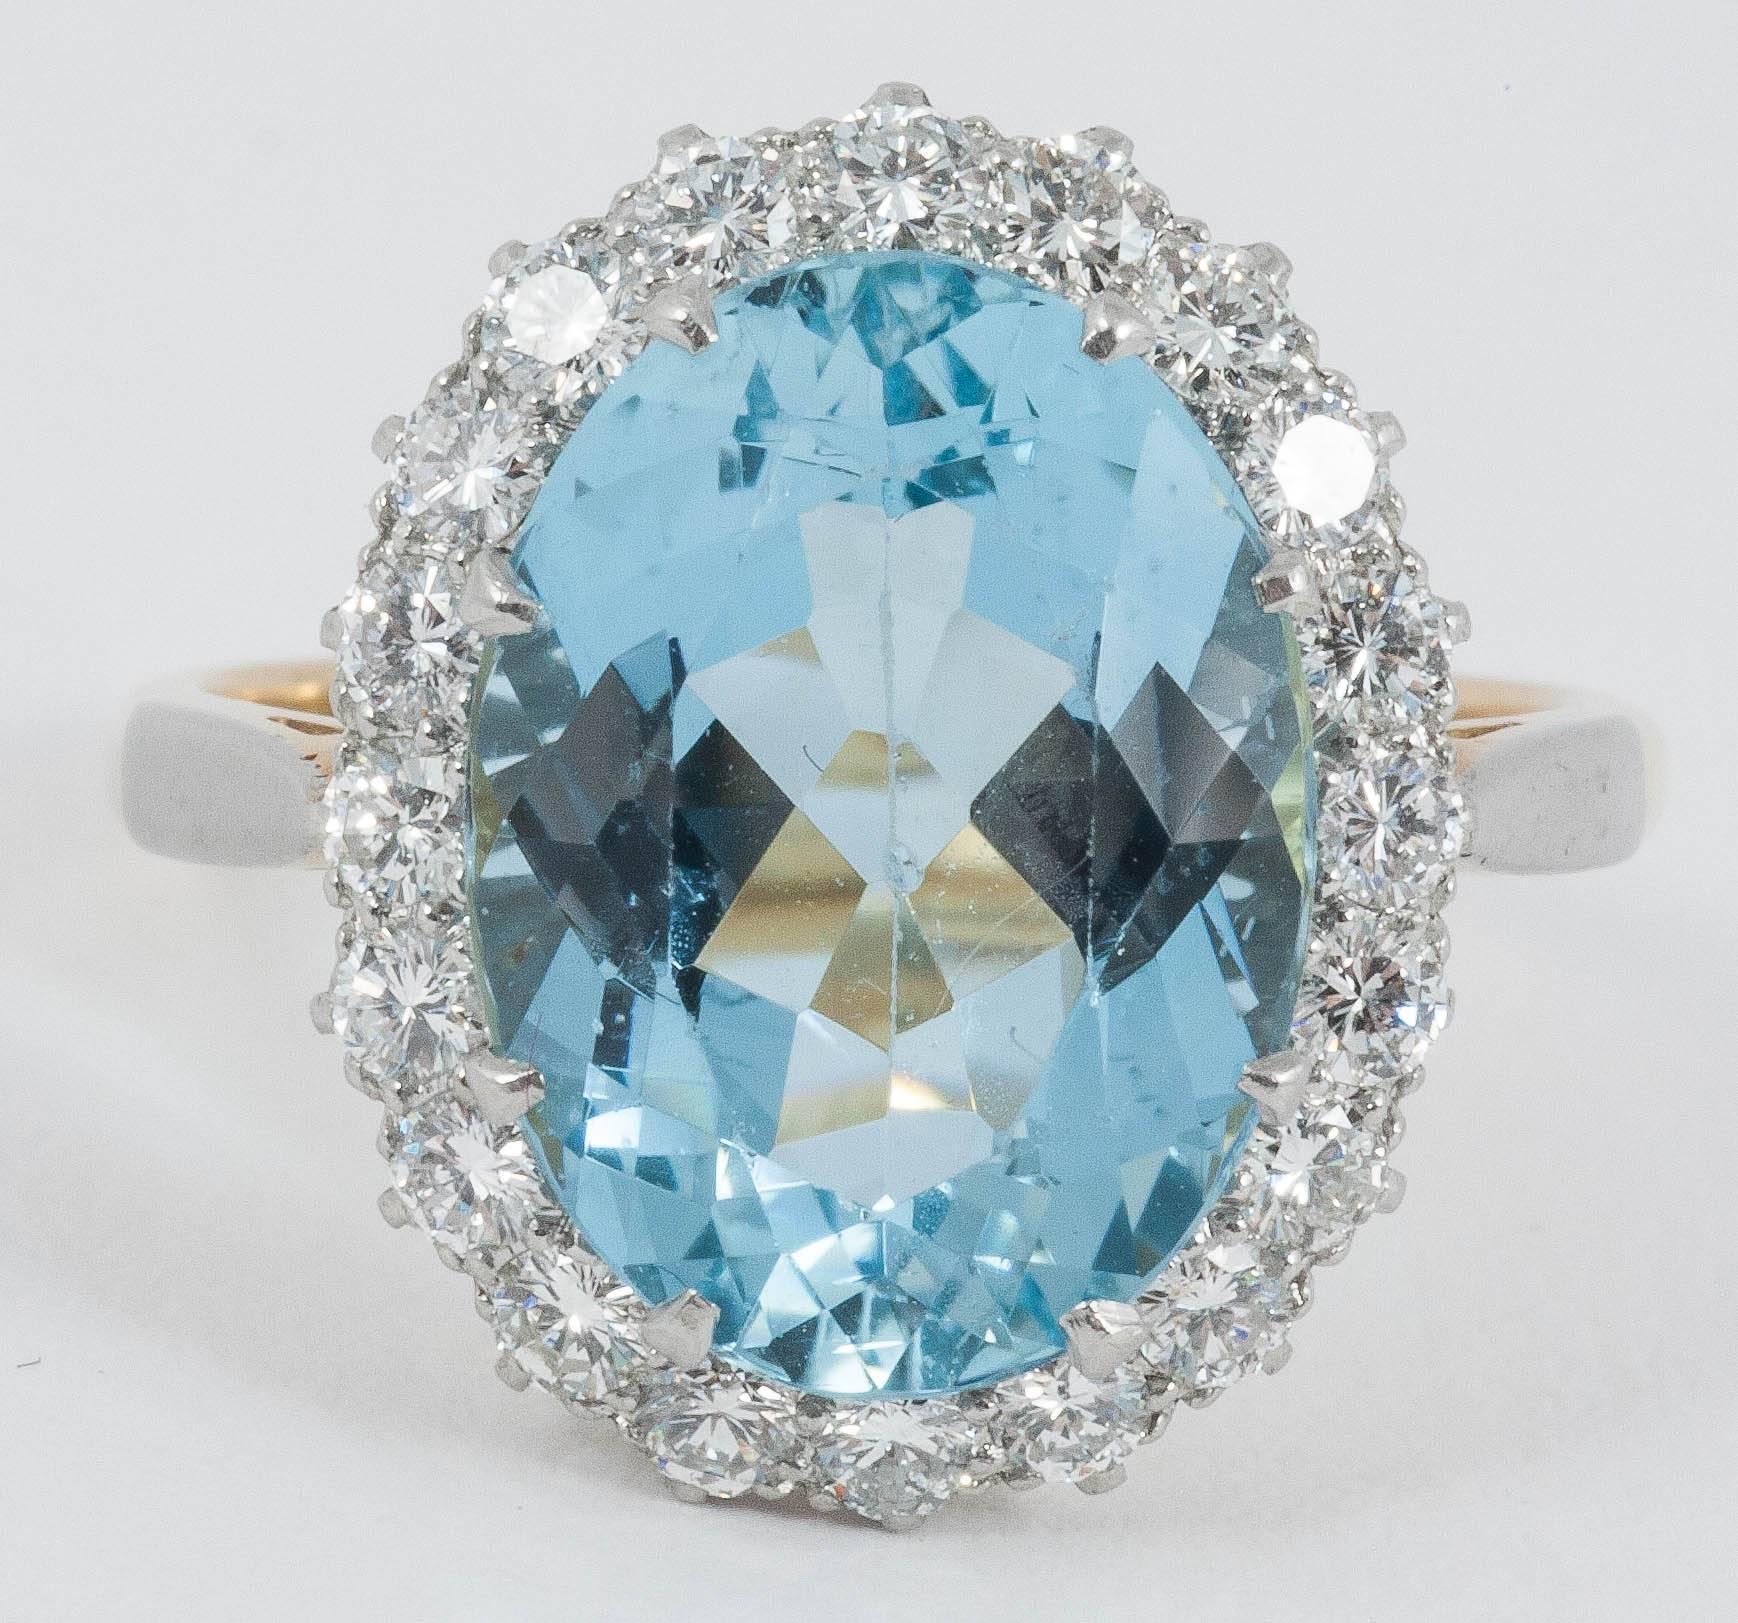 Natural oval shaped  Aquamarine surrounded by diamonds in classical style

Finger size S